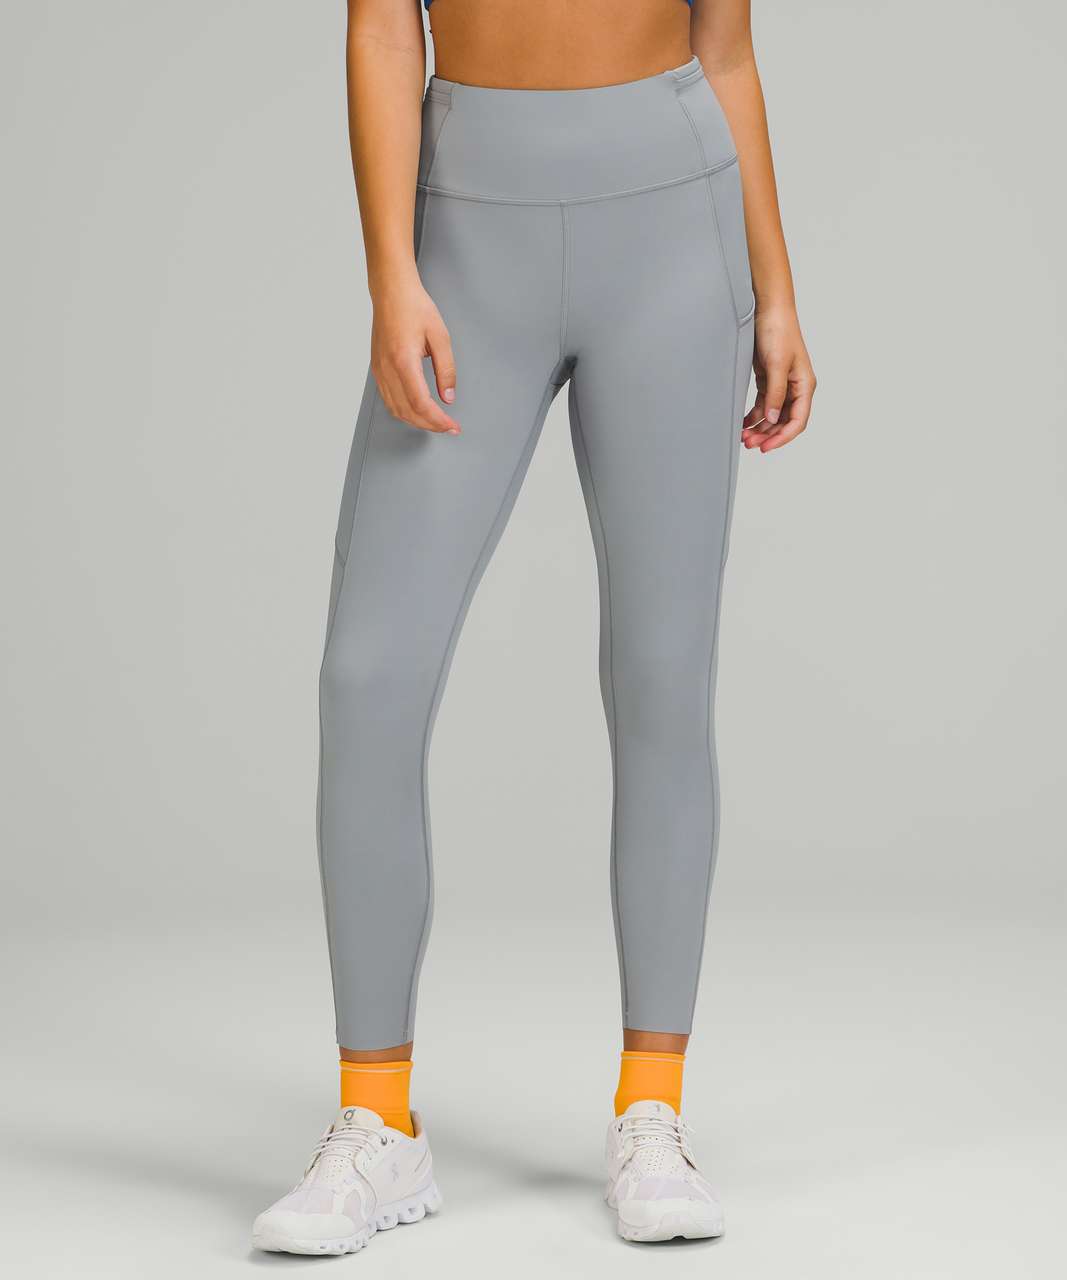 Lululemon Fast and Free High-Rise Tight 25 *Nulux - Rhino Grey